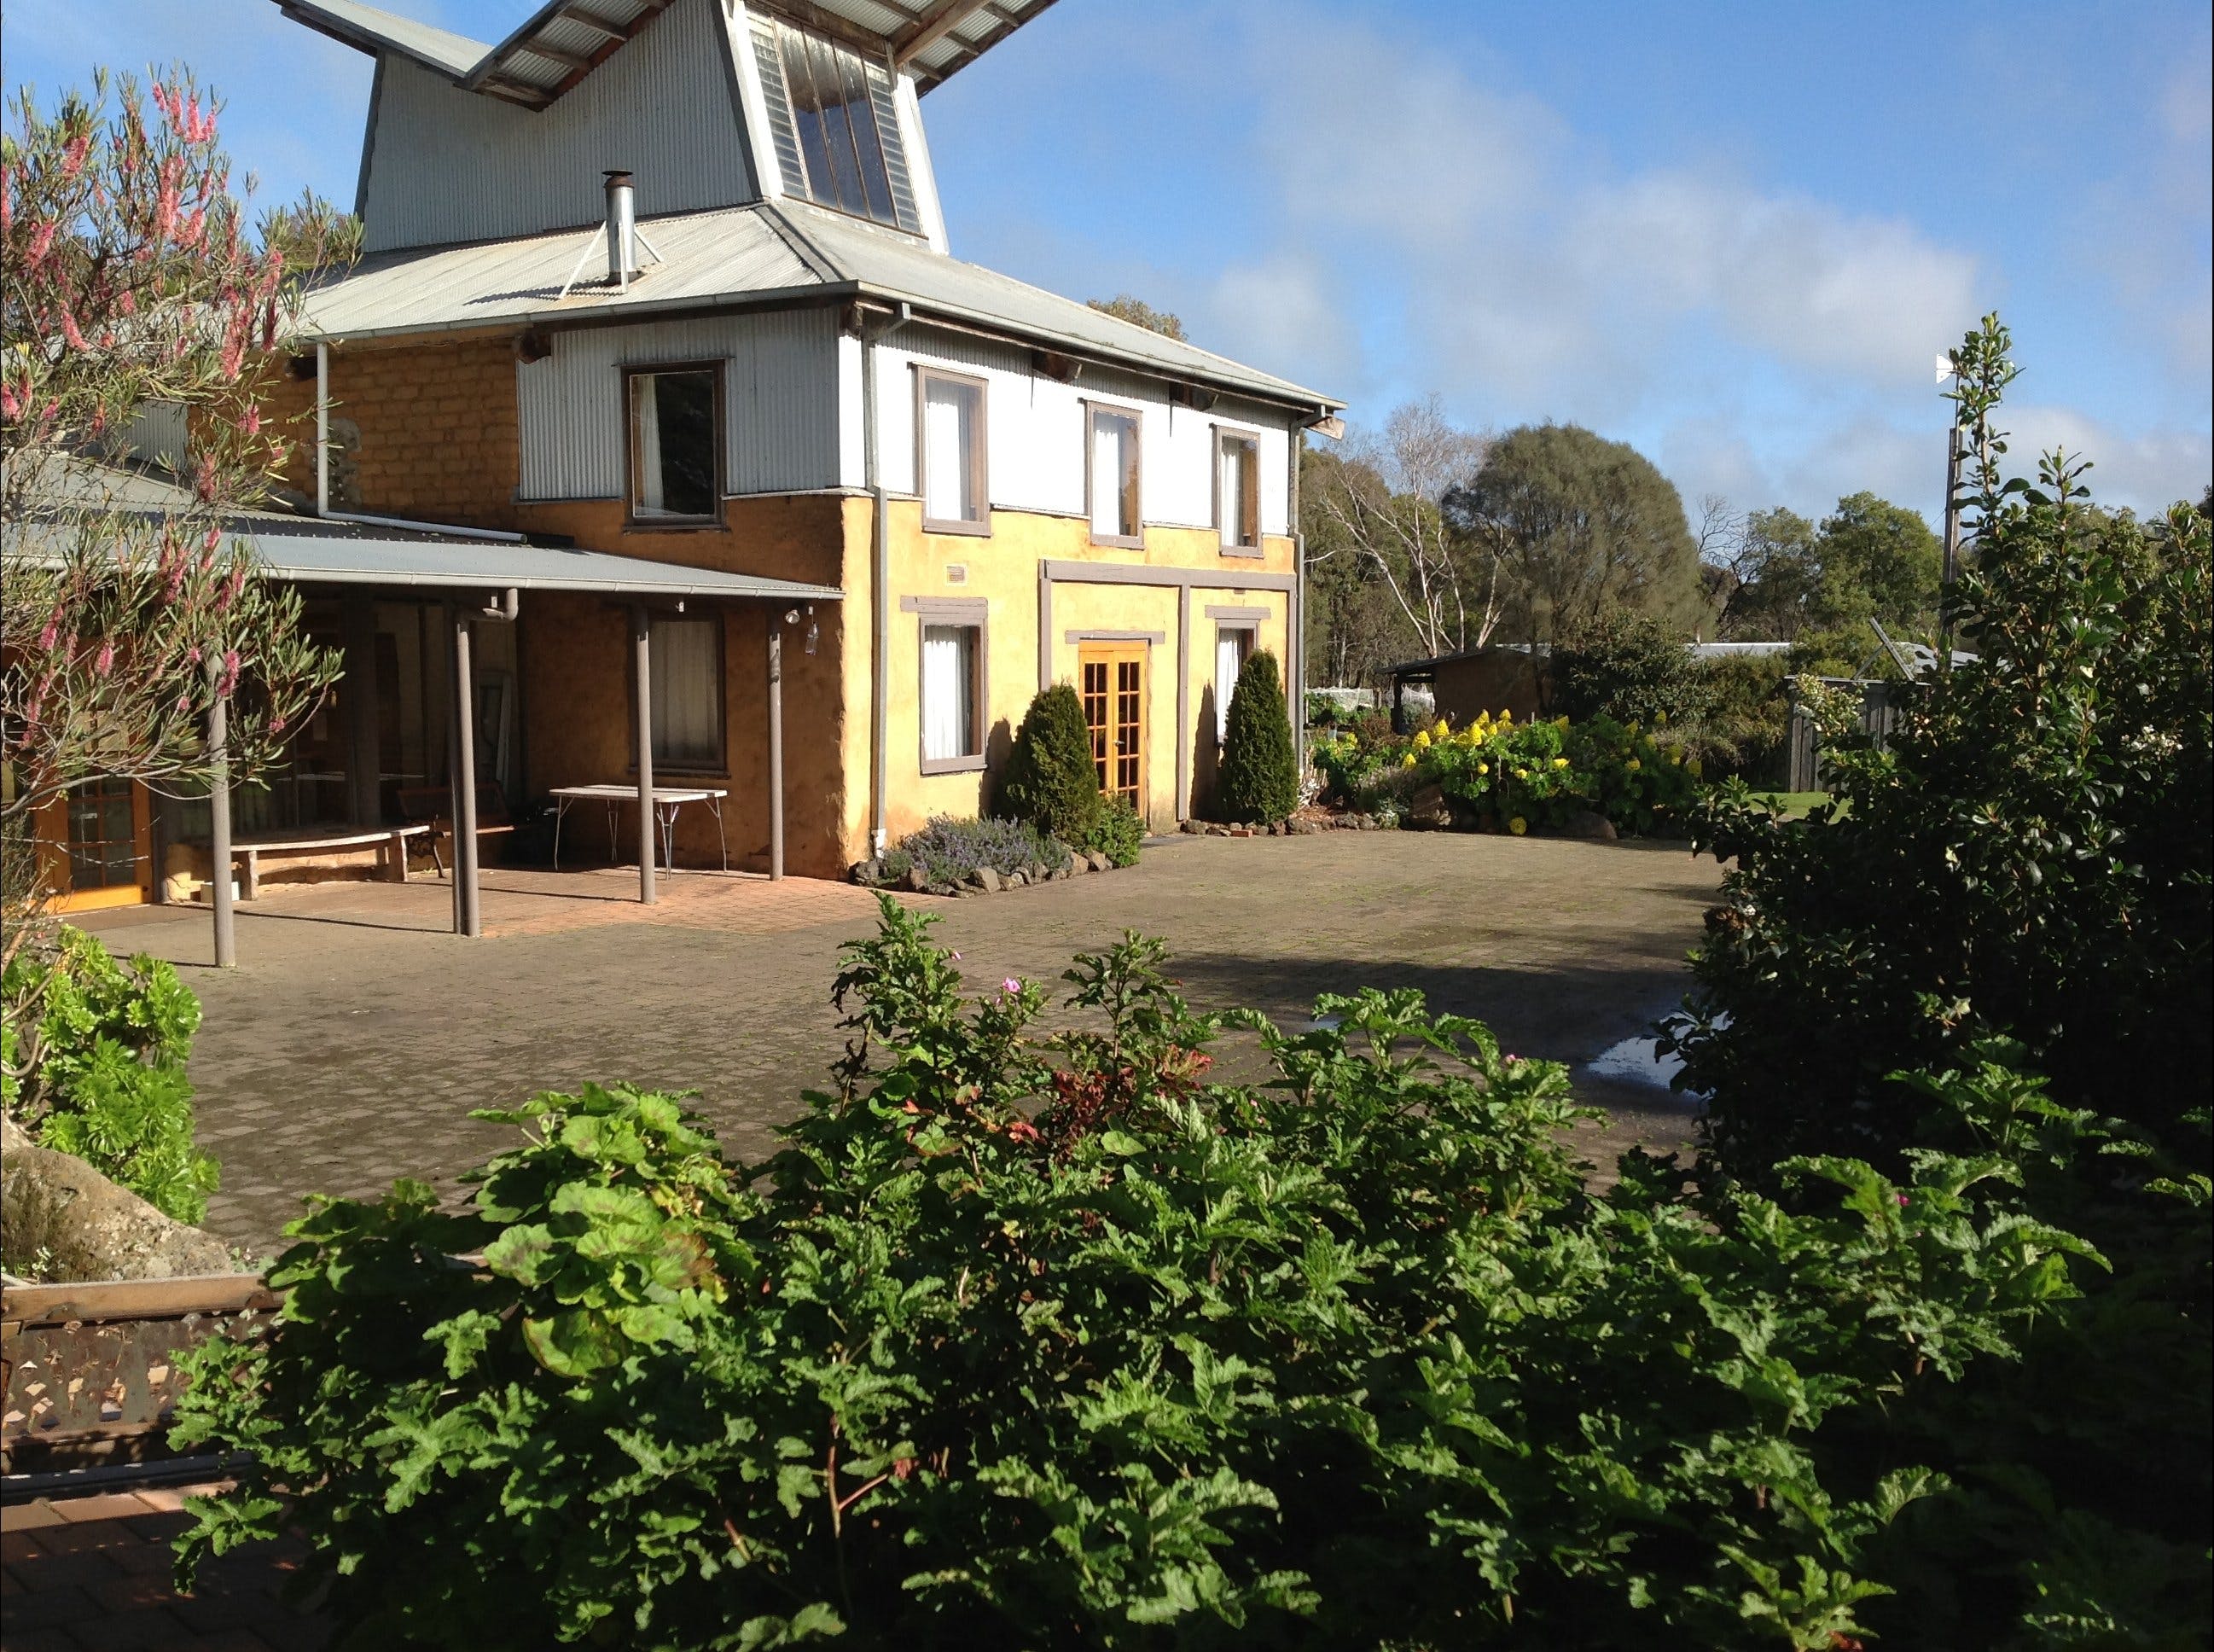 HIRL Hamilton Institute of Rural Learning - Accommodation Resorts